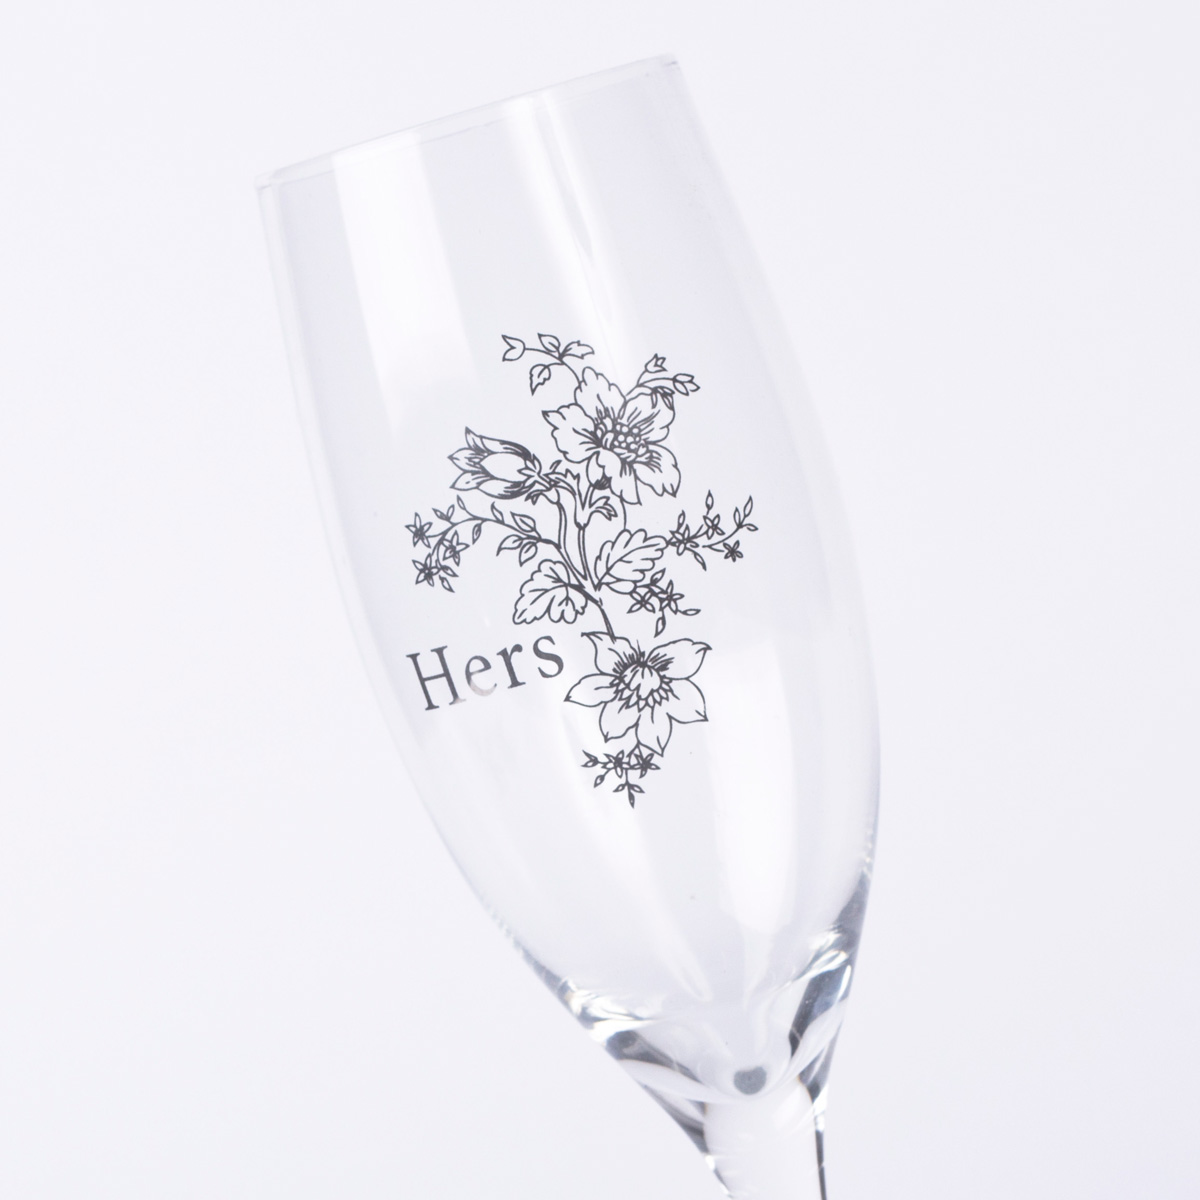 Engagement His & Hers Champagne Glass Set